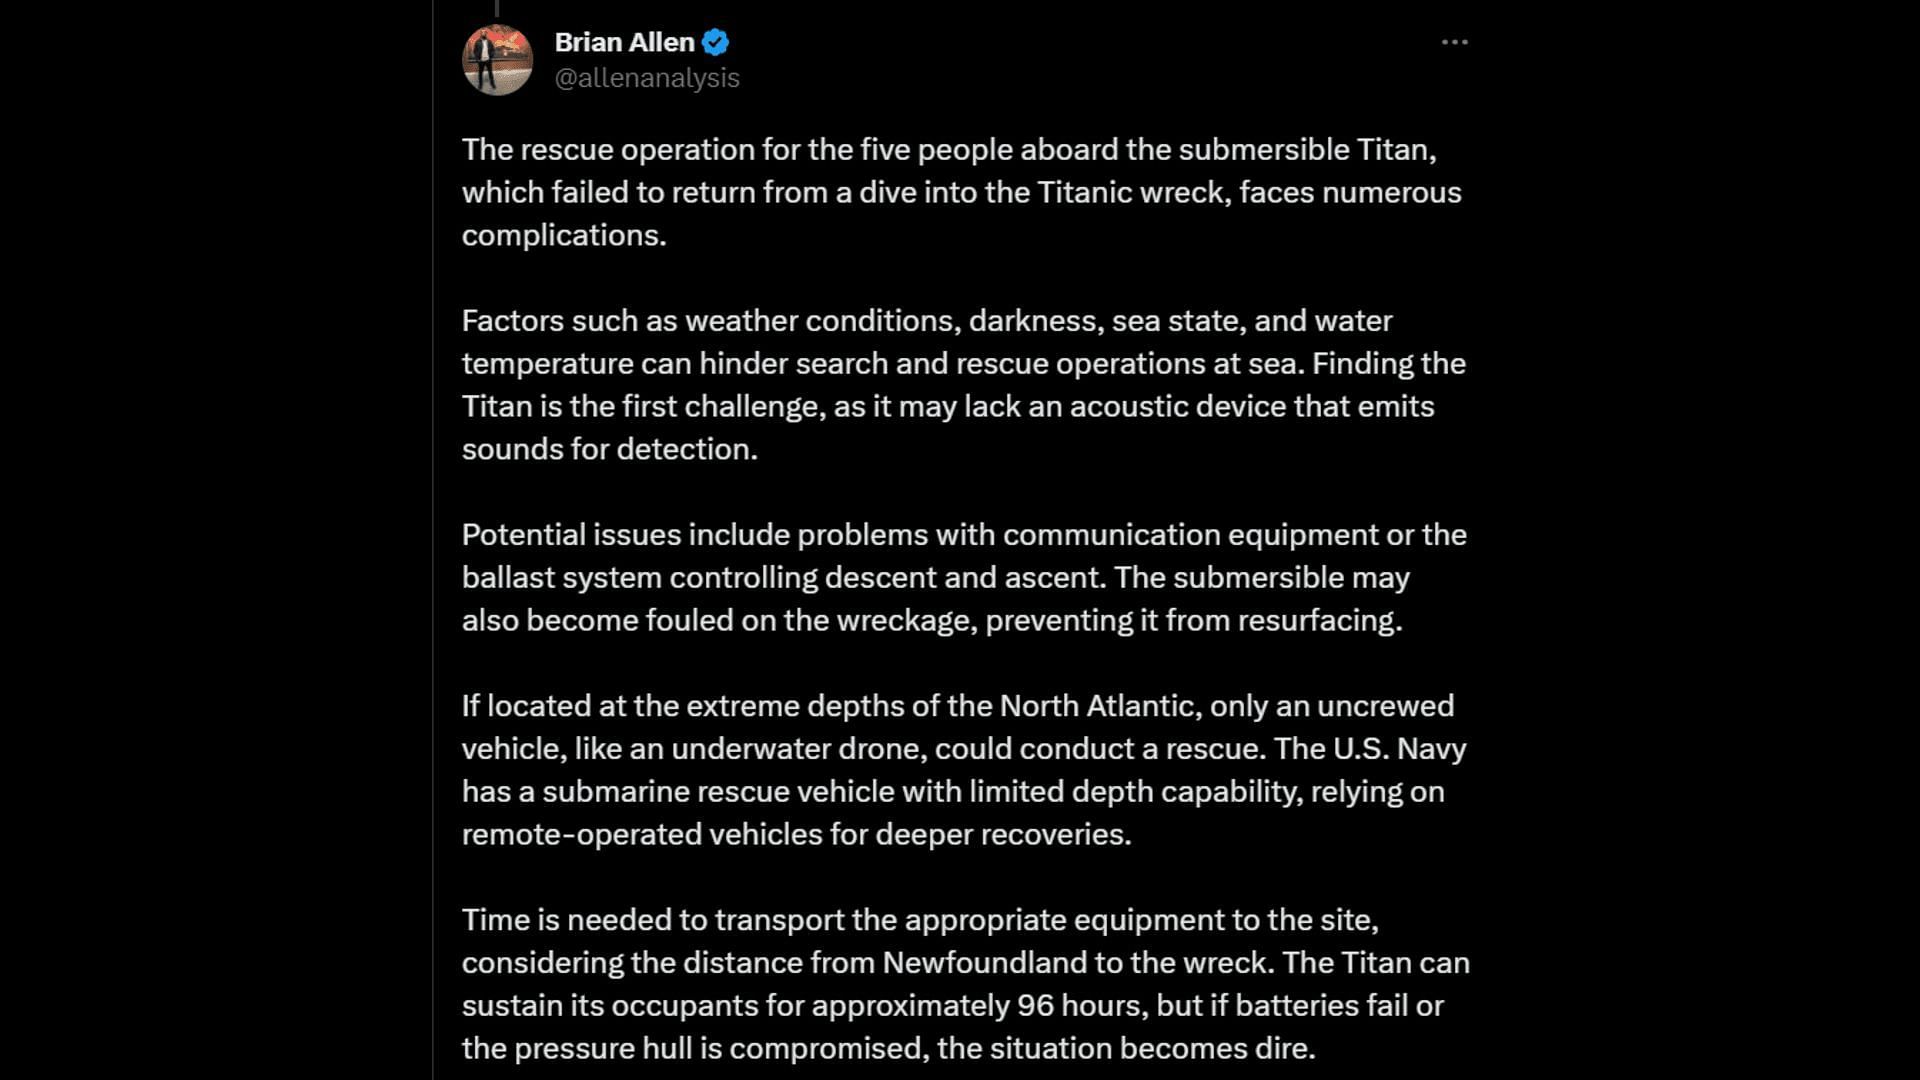 An expert&#039;s detailed analysis of the risks and obstacles involved in the search and rescue operation of the Titan submersible. (Image via Twitter/Brian Allen)